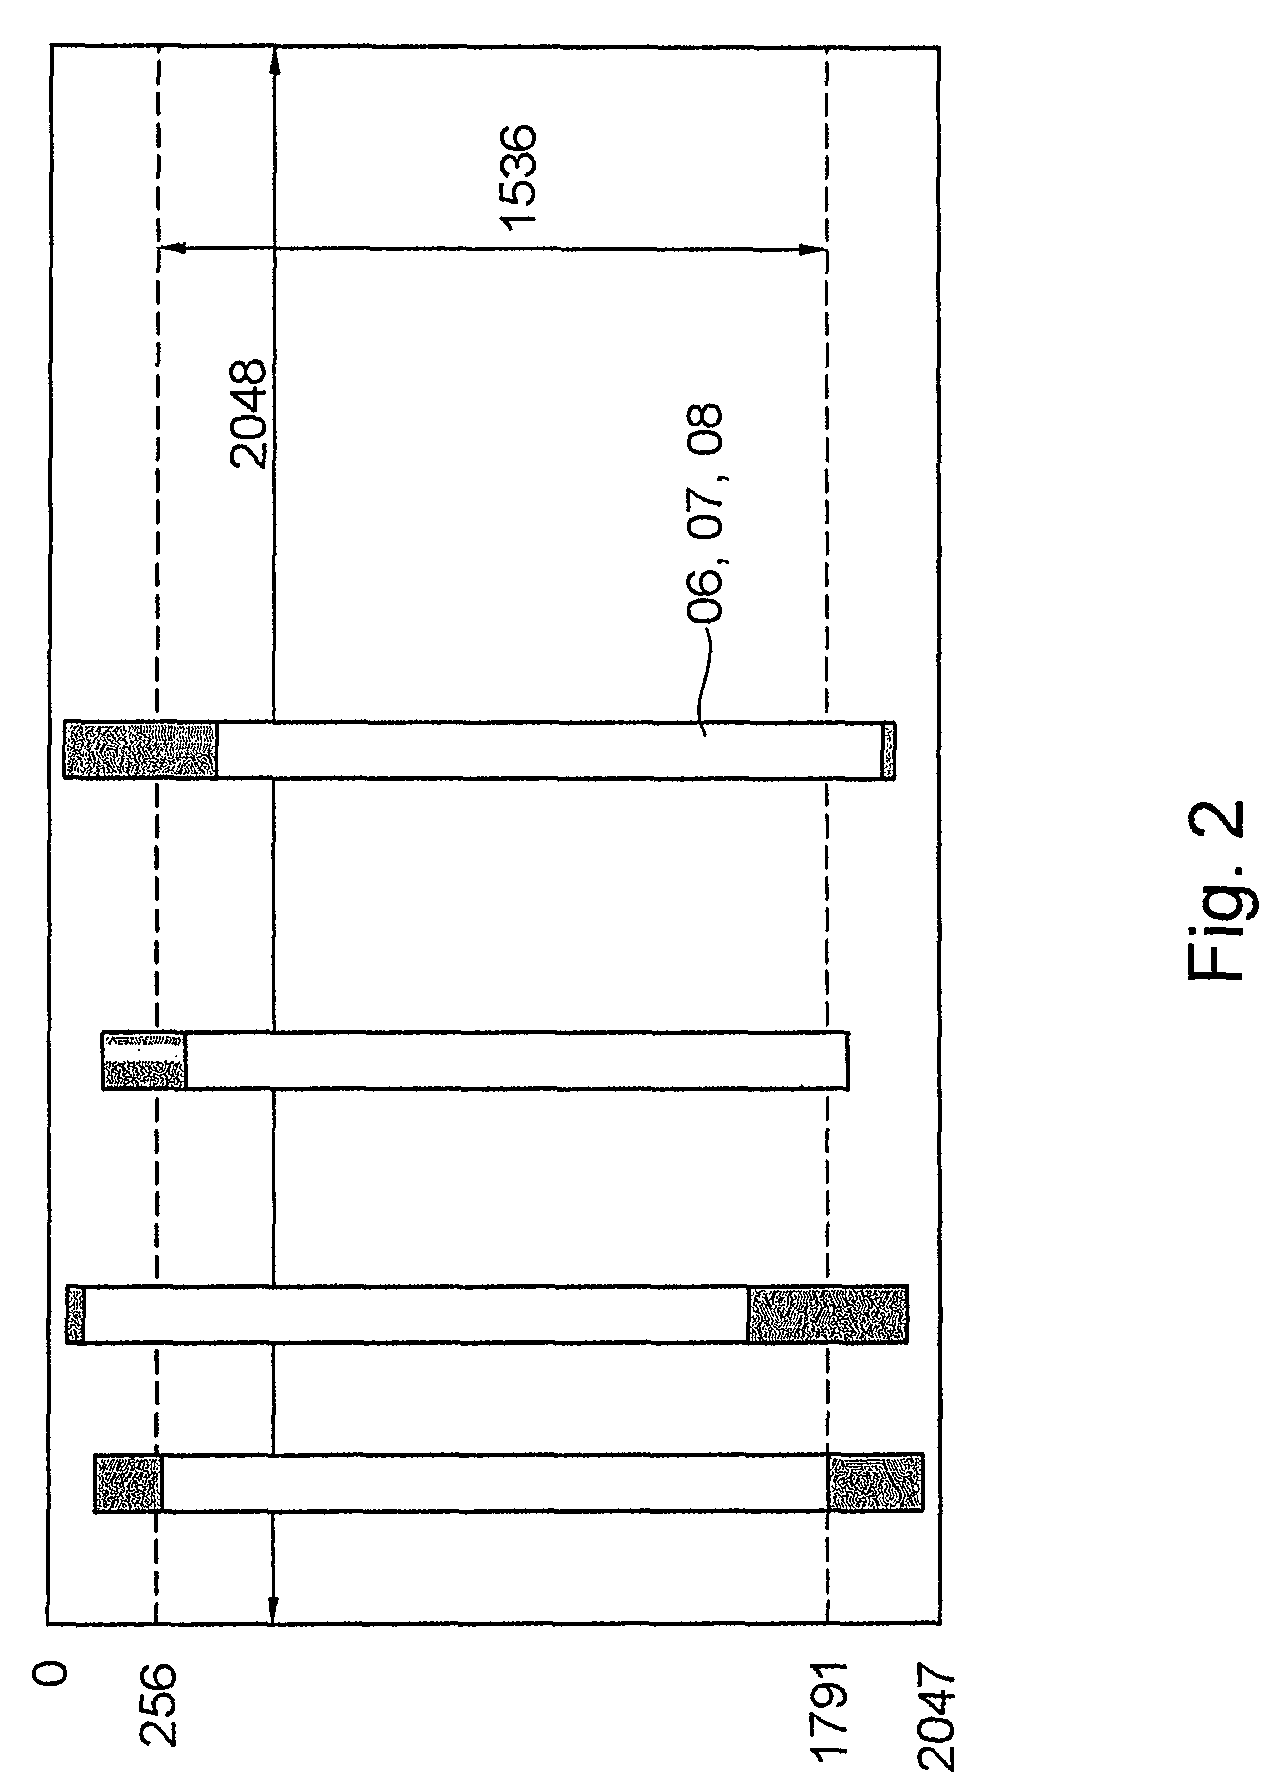 Method for inspecting at least one copy of a printed product